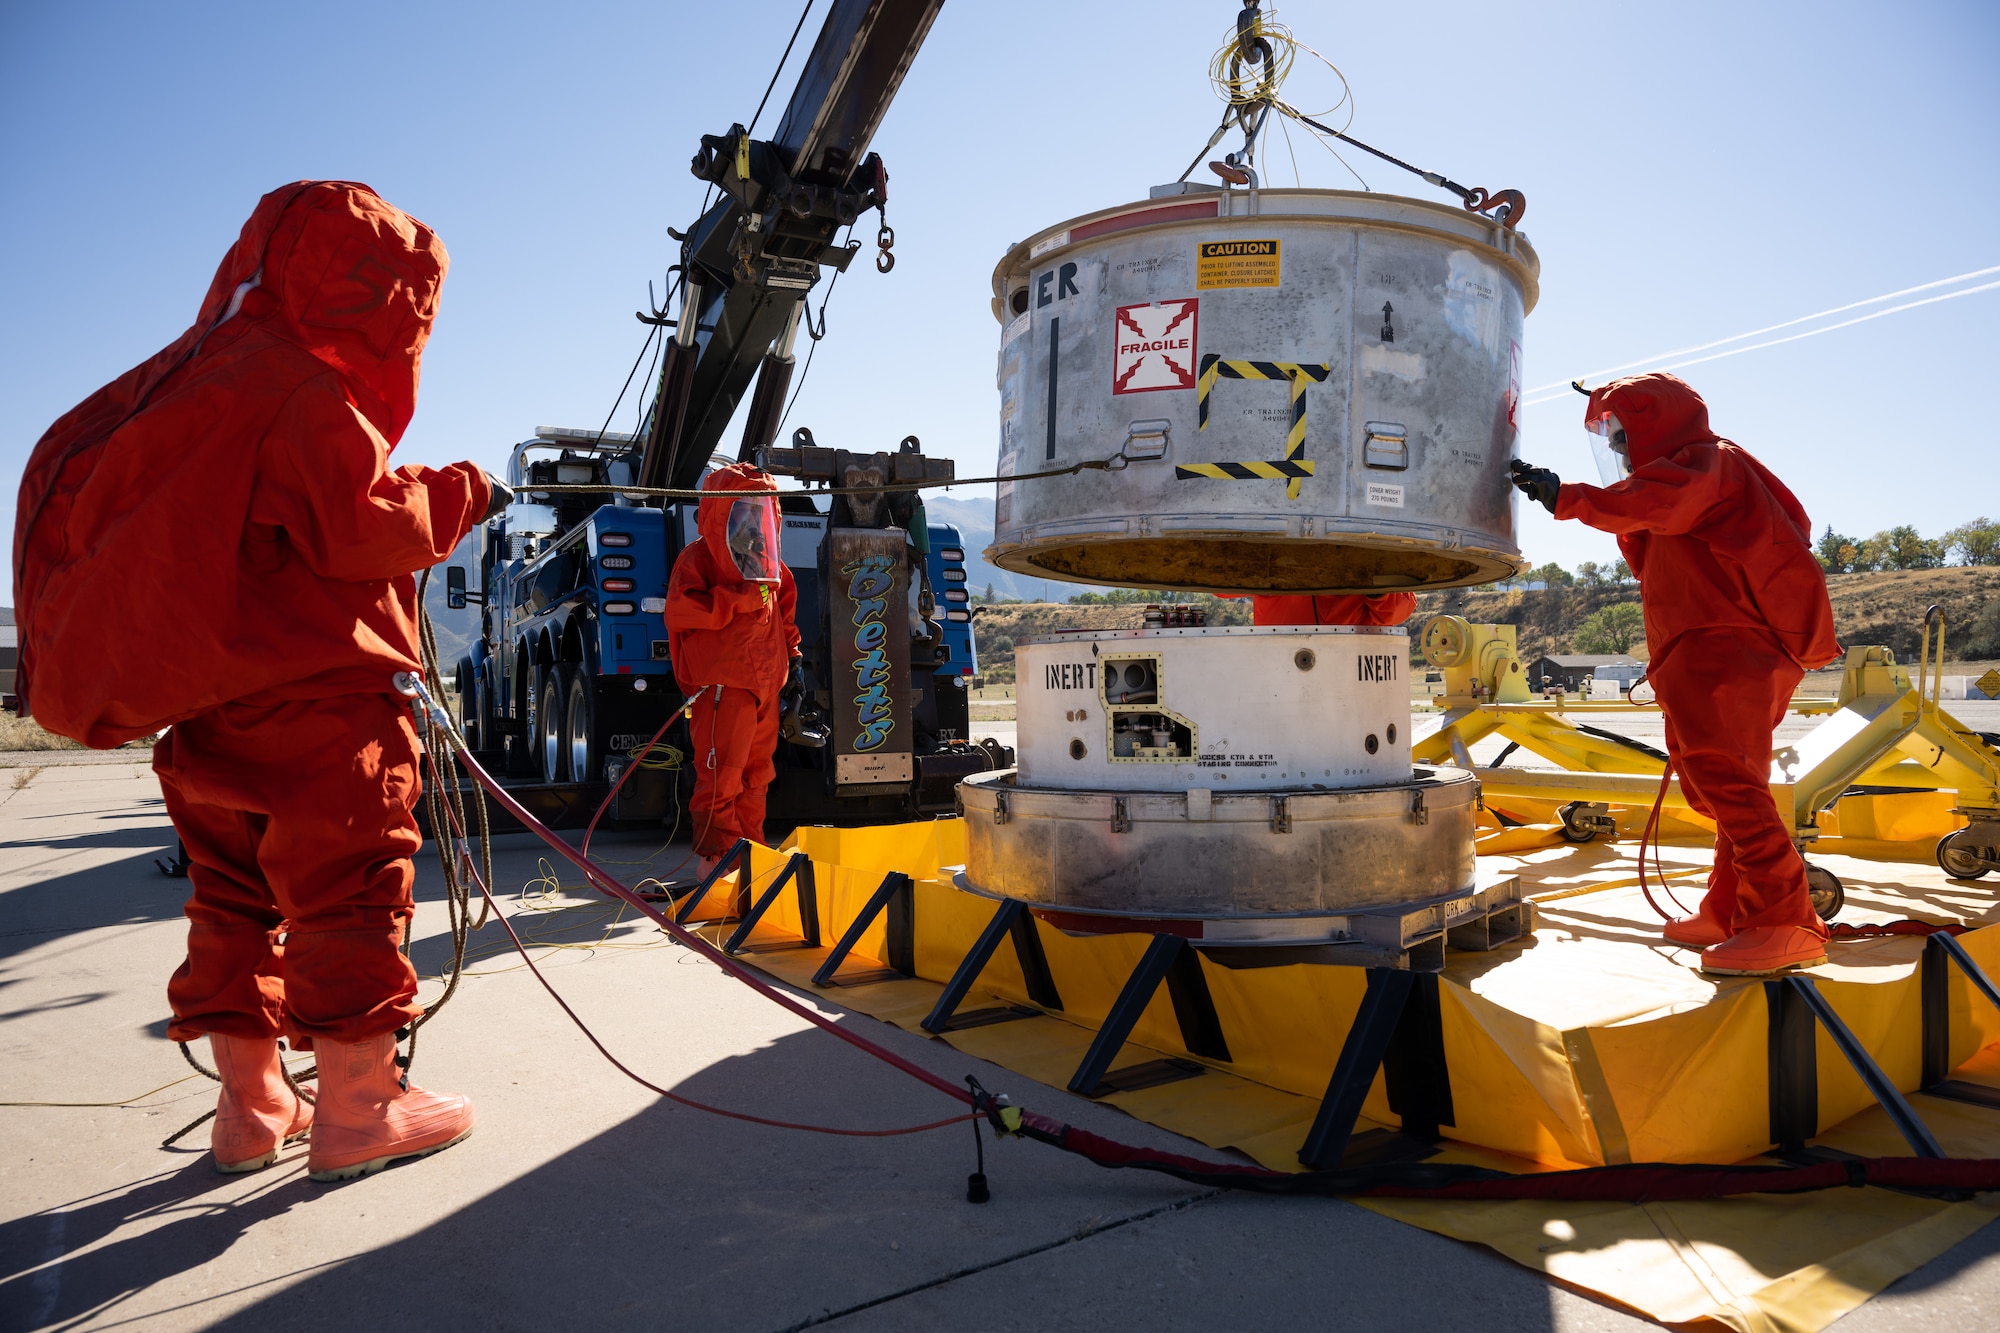 Members of the Missile Mishap Response Team place a container lid over the top of  Minuteman III inert guidance system container during a training event at Hill Air Force Base, Utah, Oct. 4, 2022.